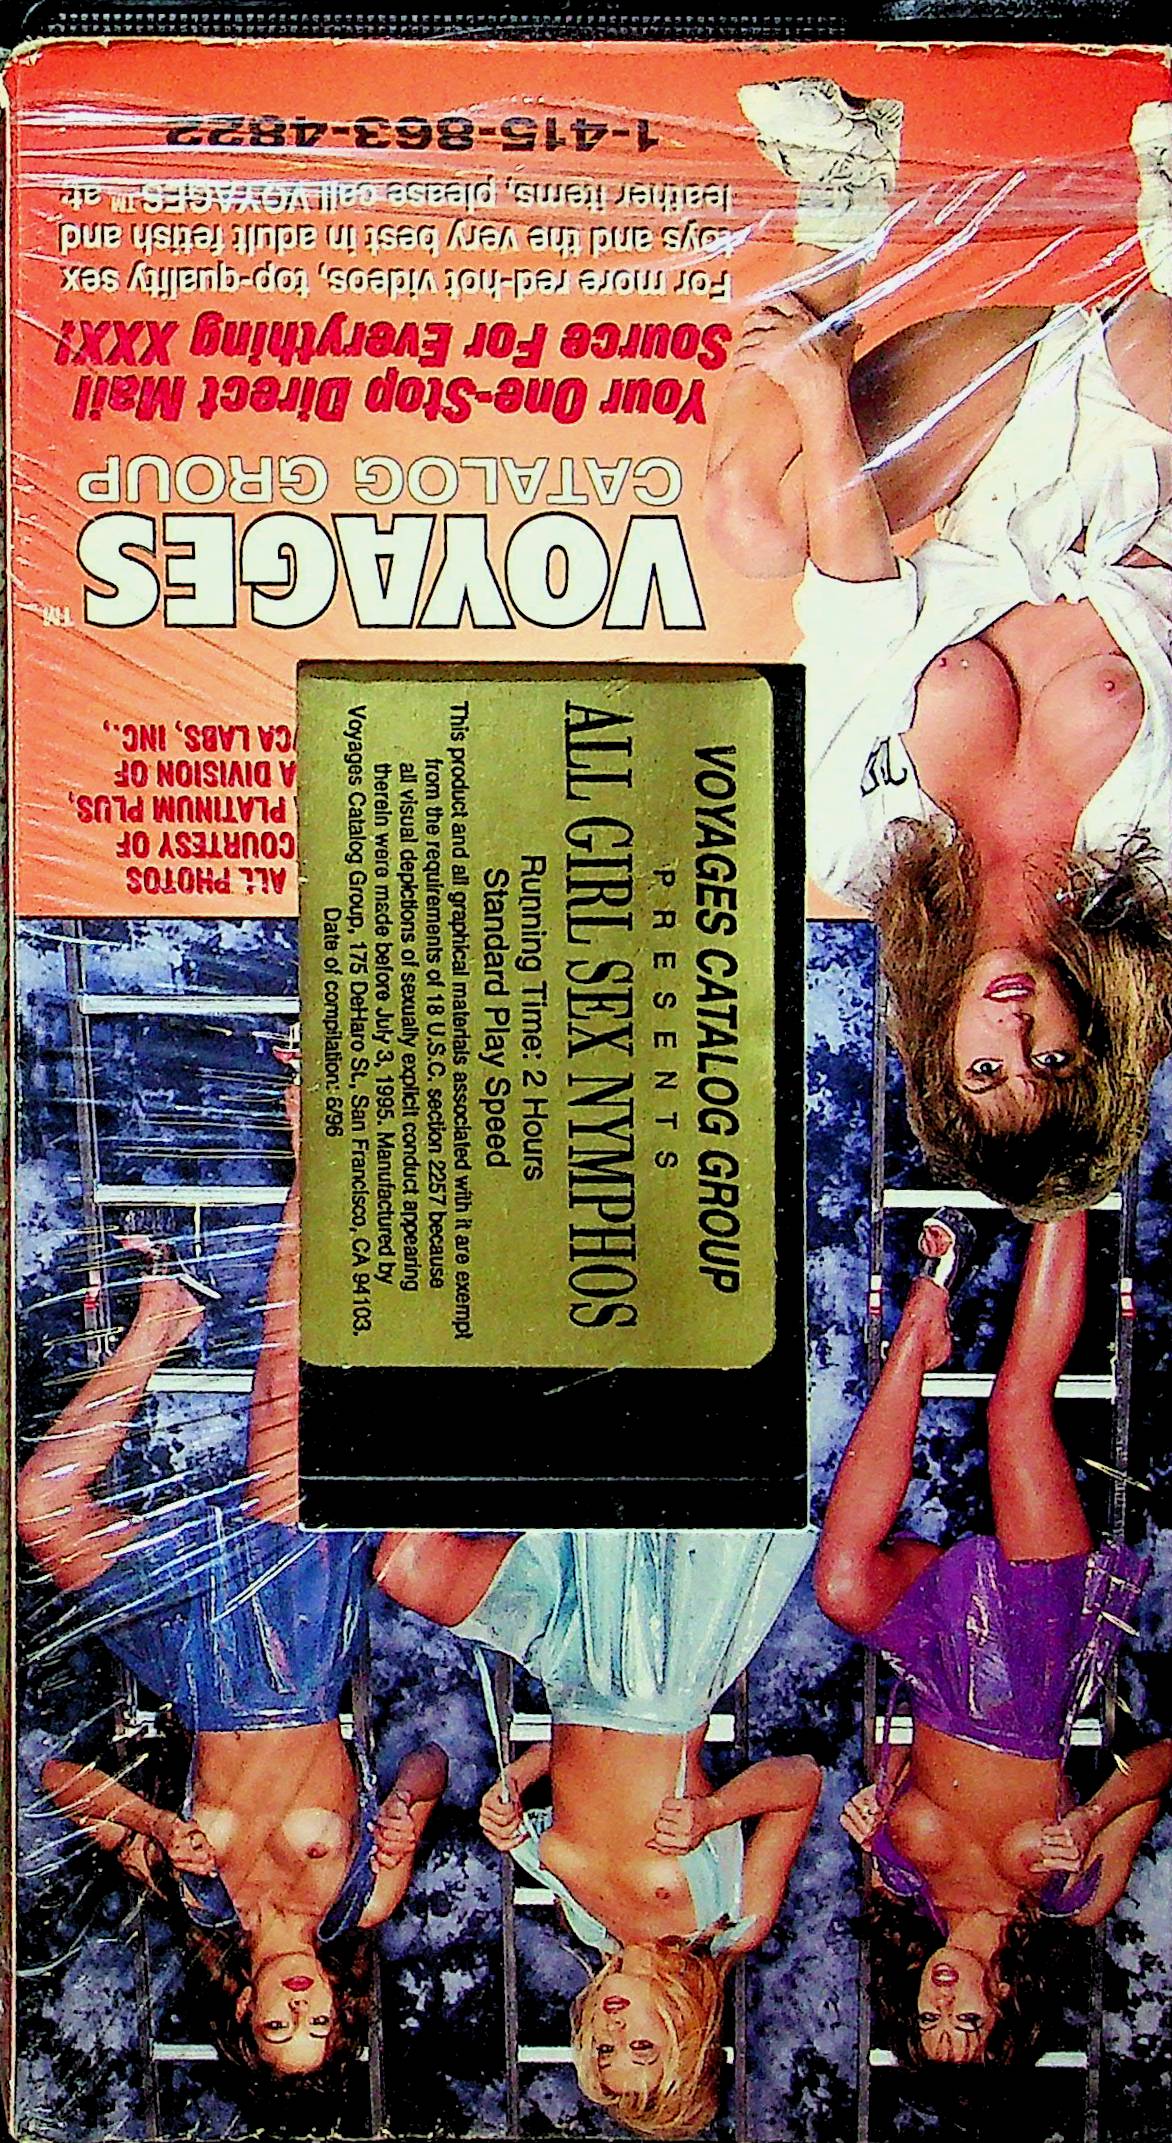 Adult VHS Movie All Girl Sex Nymphos By Voyages Catalog Group 1990s 08 image